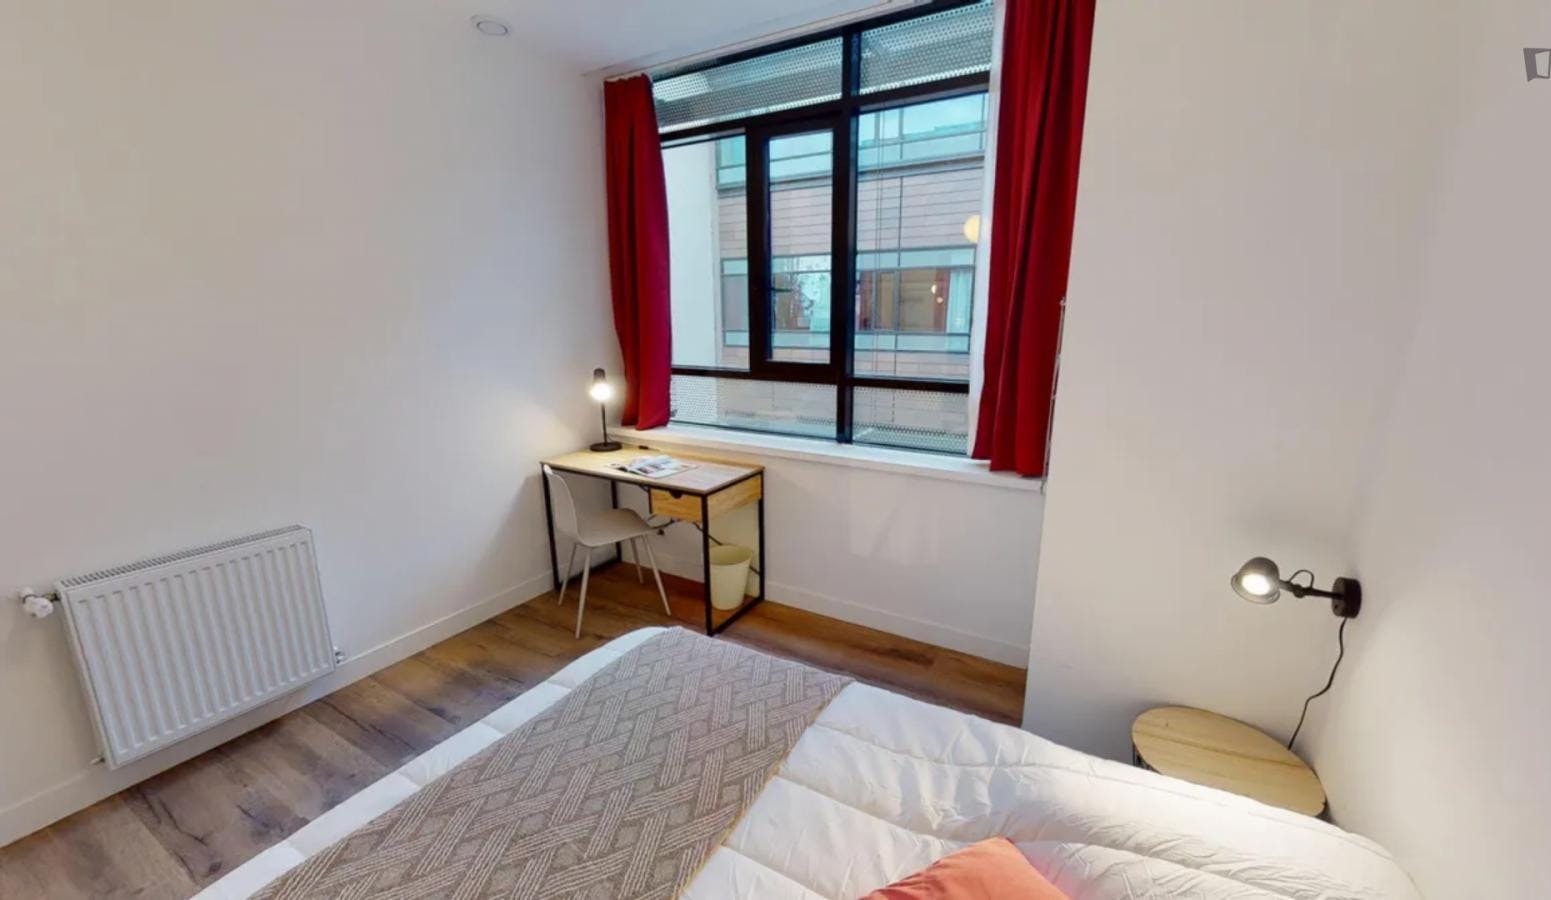 Appealing double bedroom near the Bois Colombes train station 